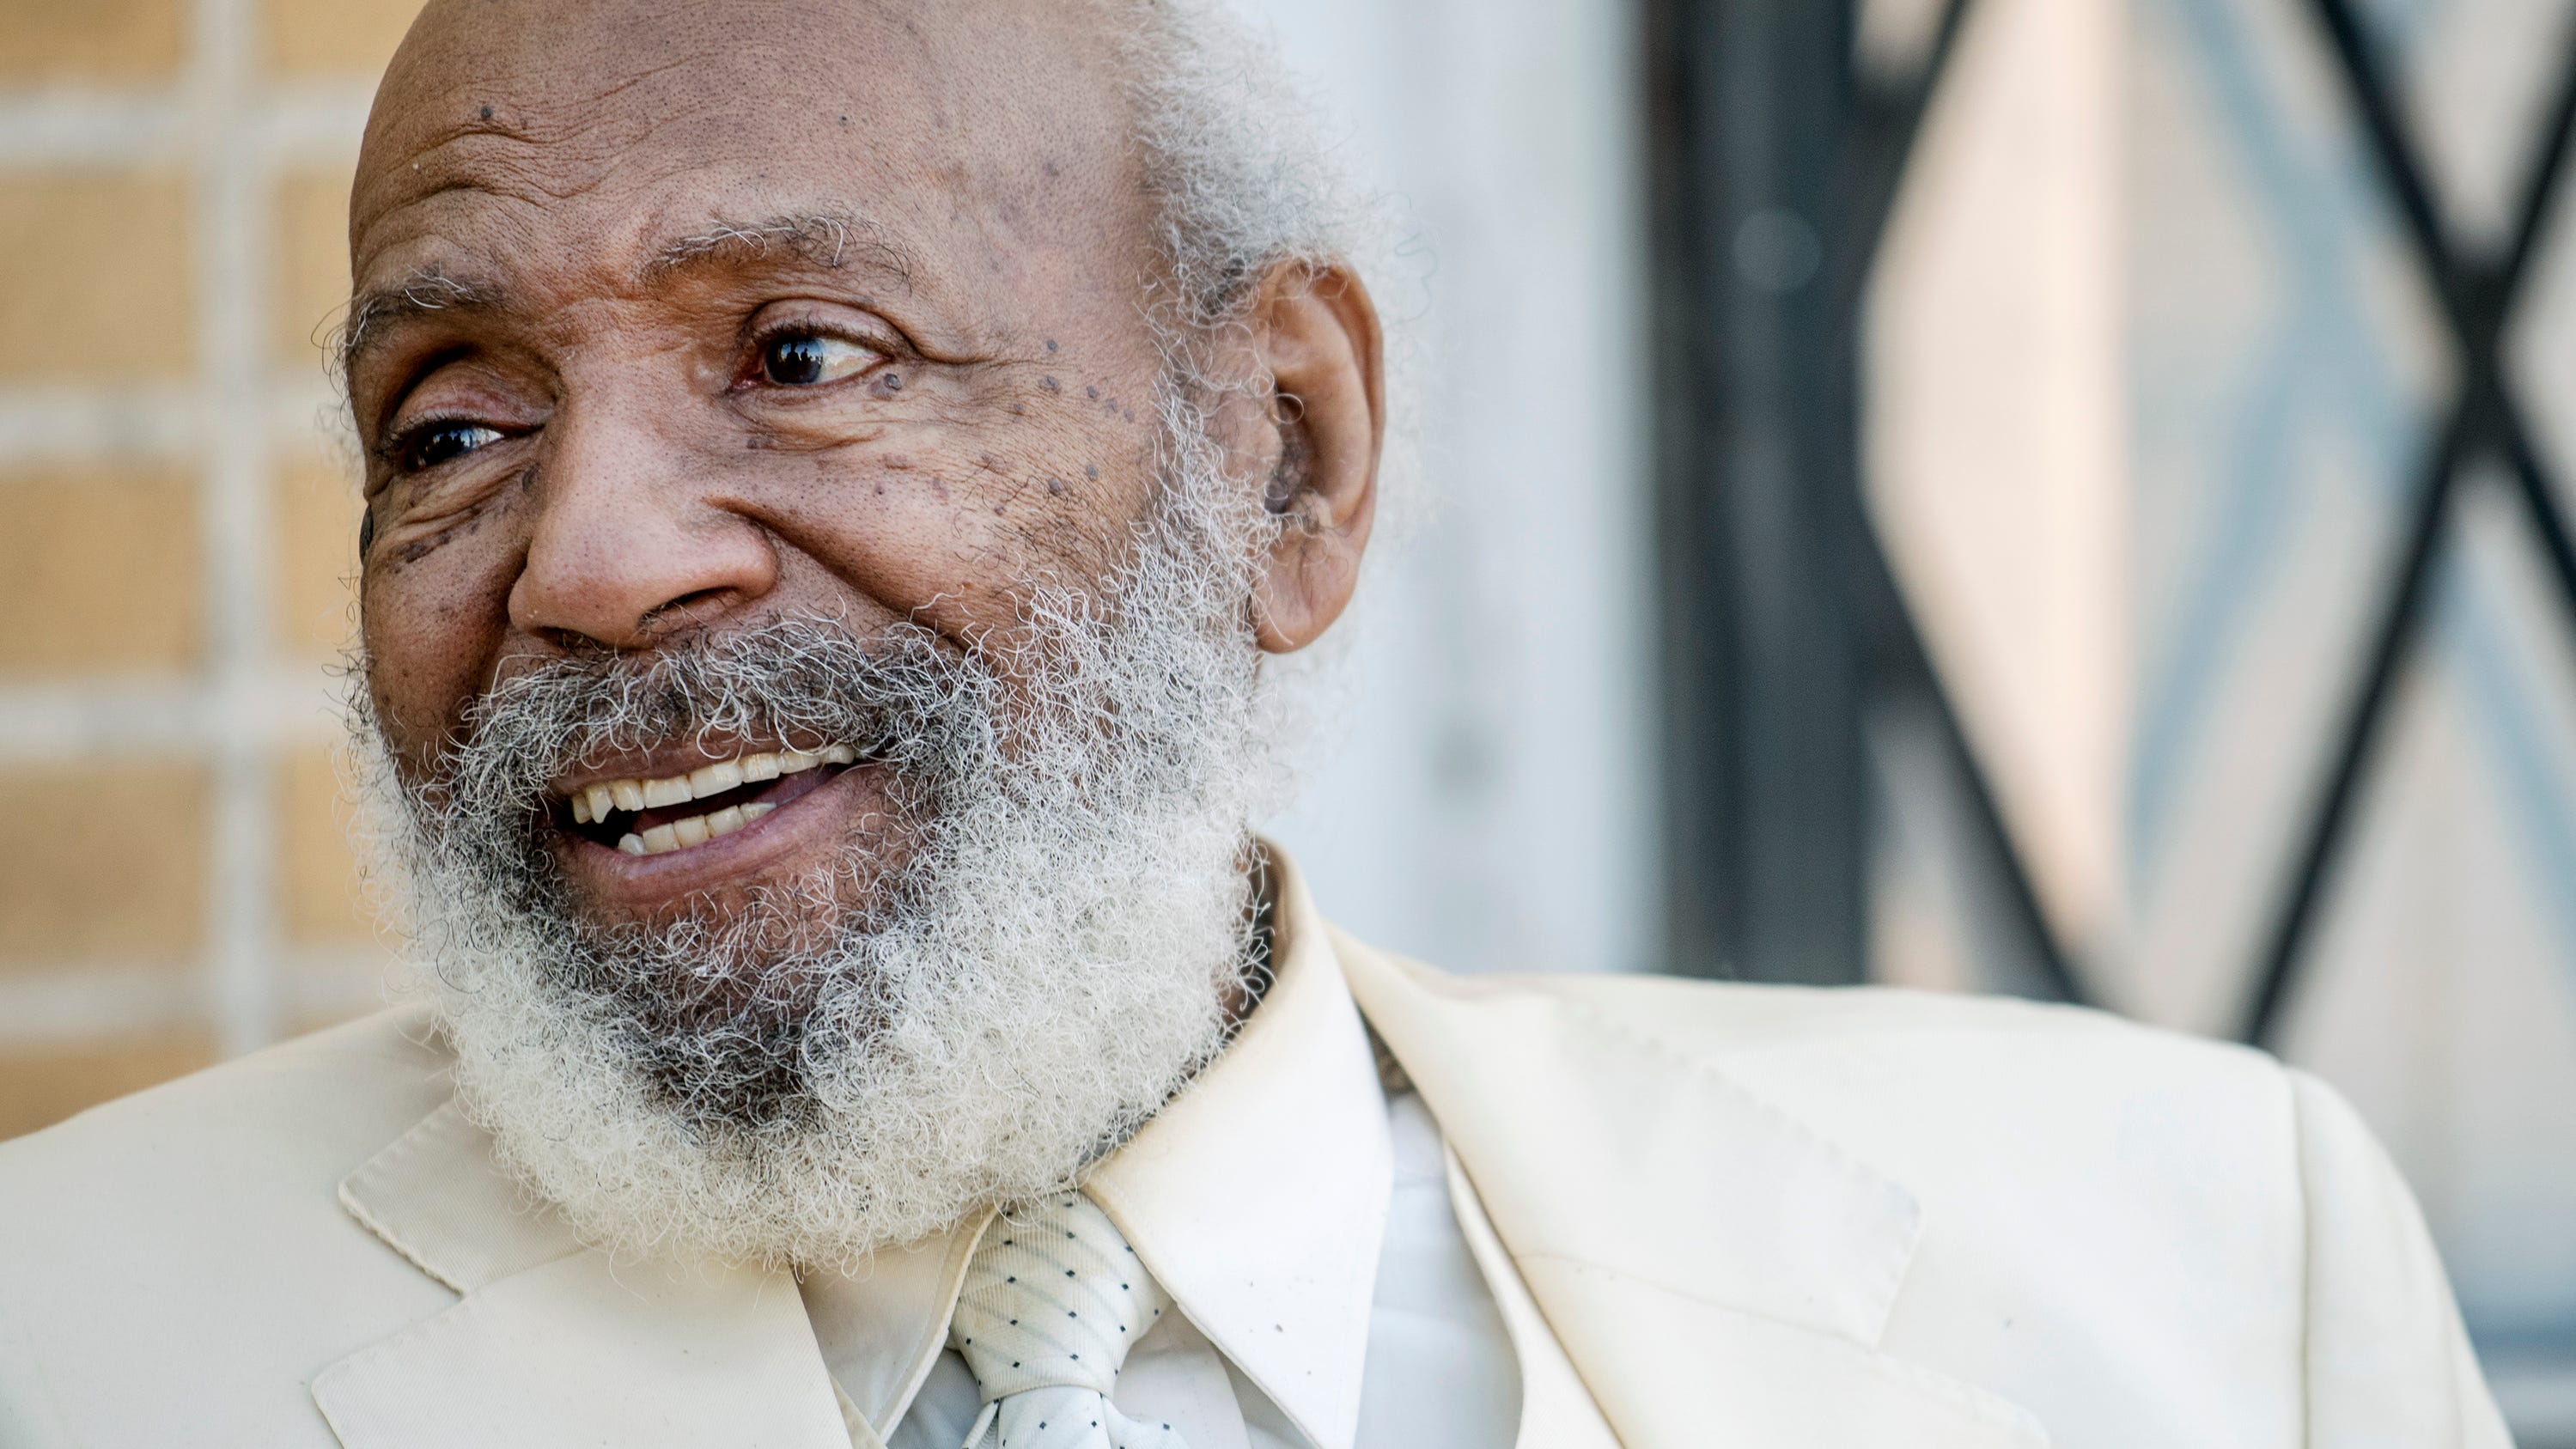 Civil rights icon James Meredith announces new museum, Bible center